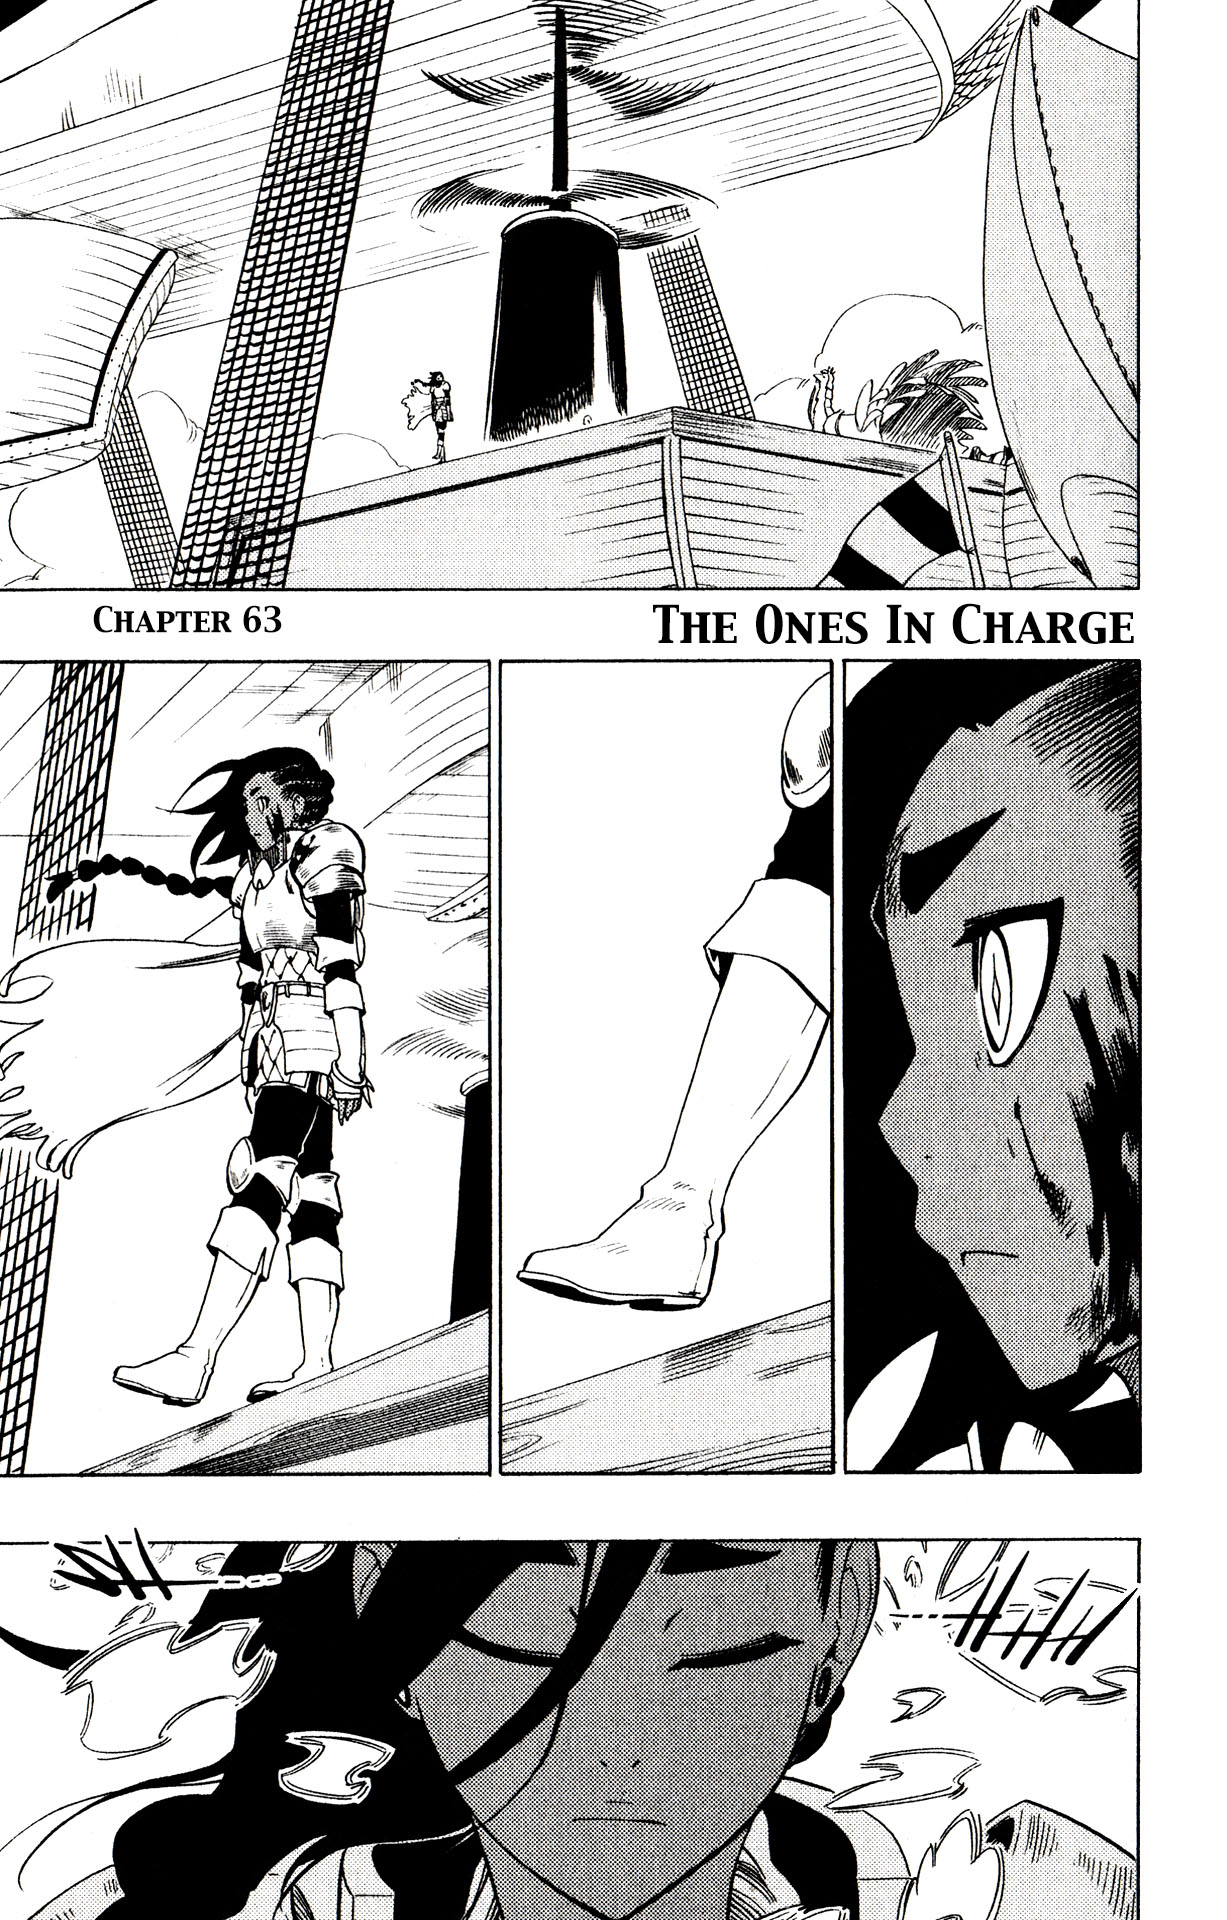 Radiant Vol. 9 Ch. 63 The Ones In Charge